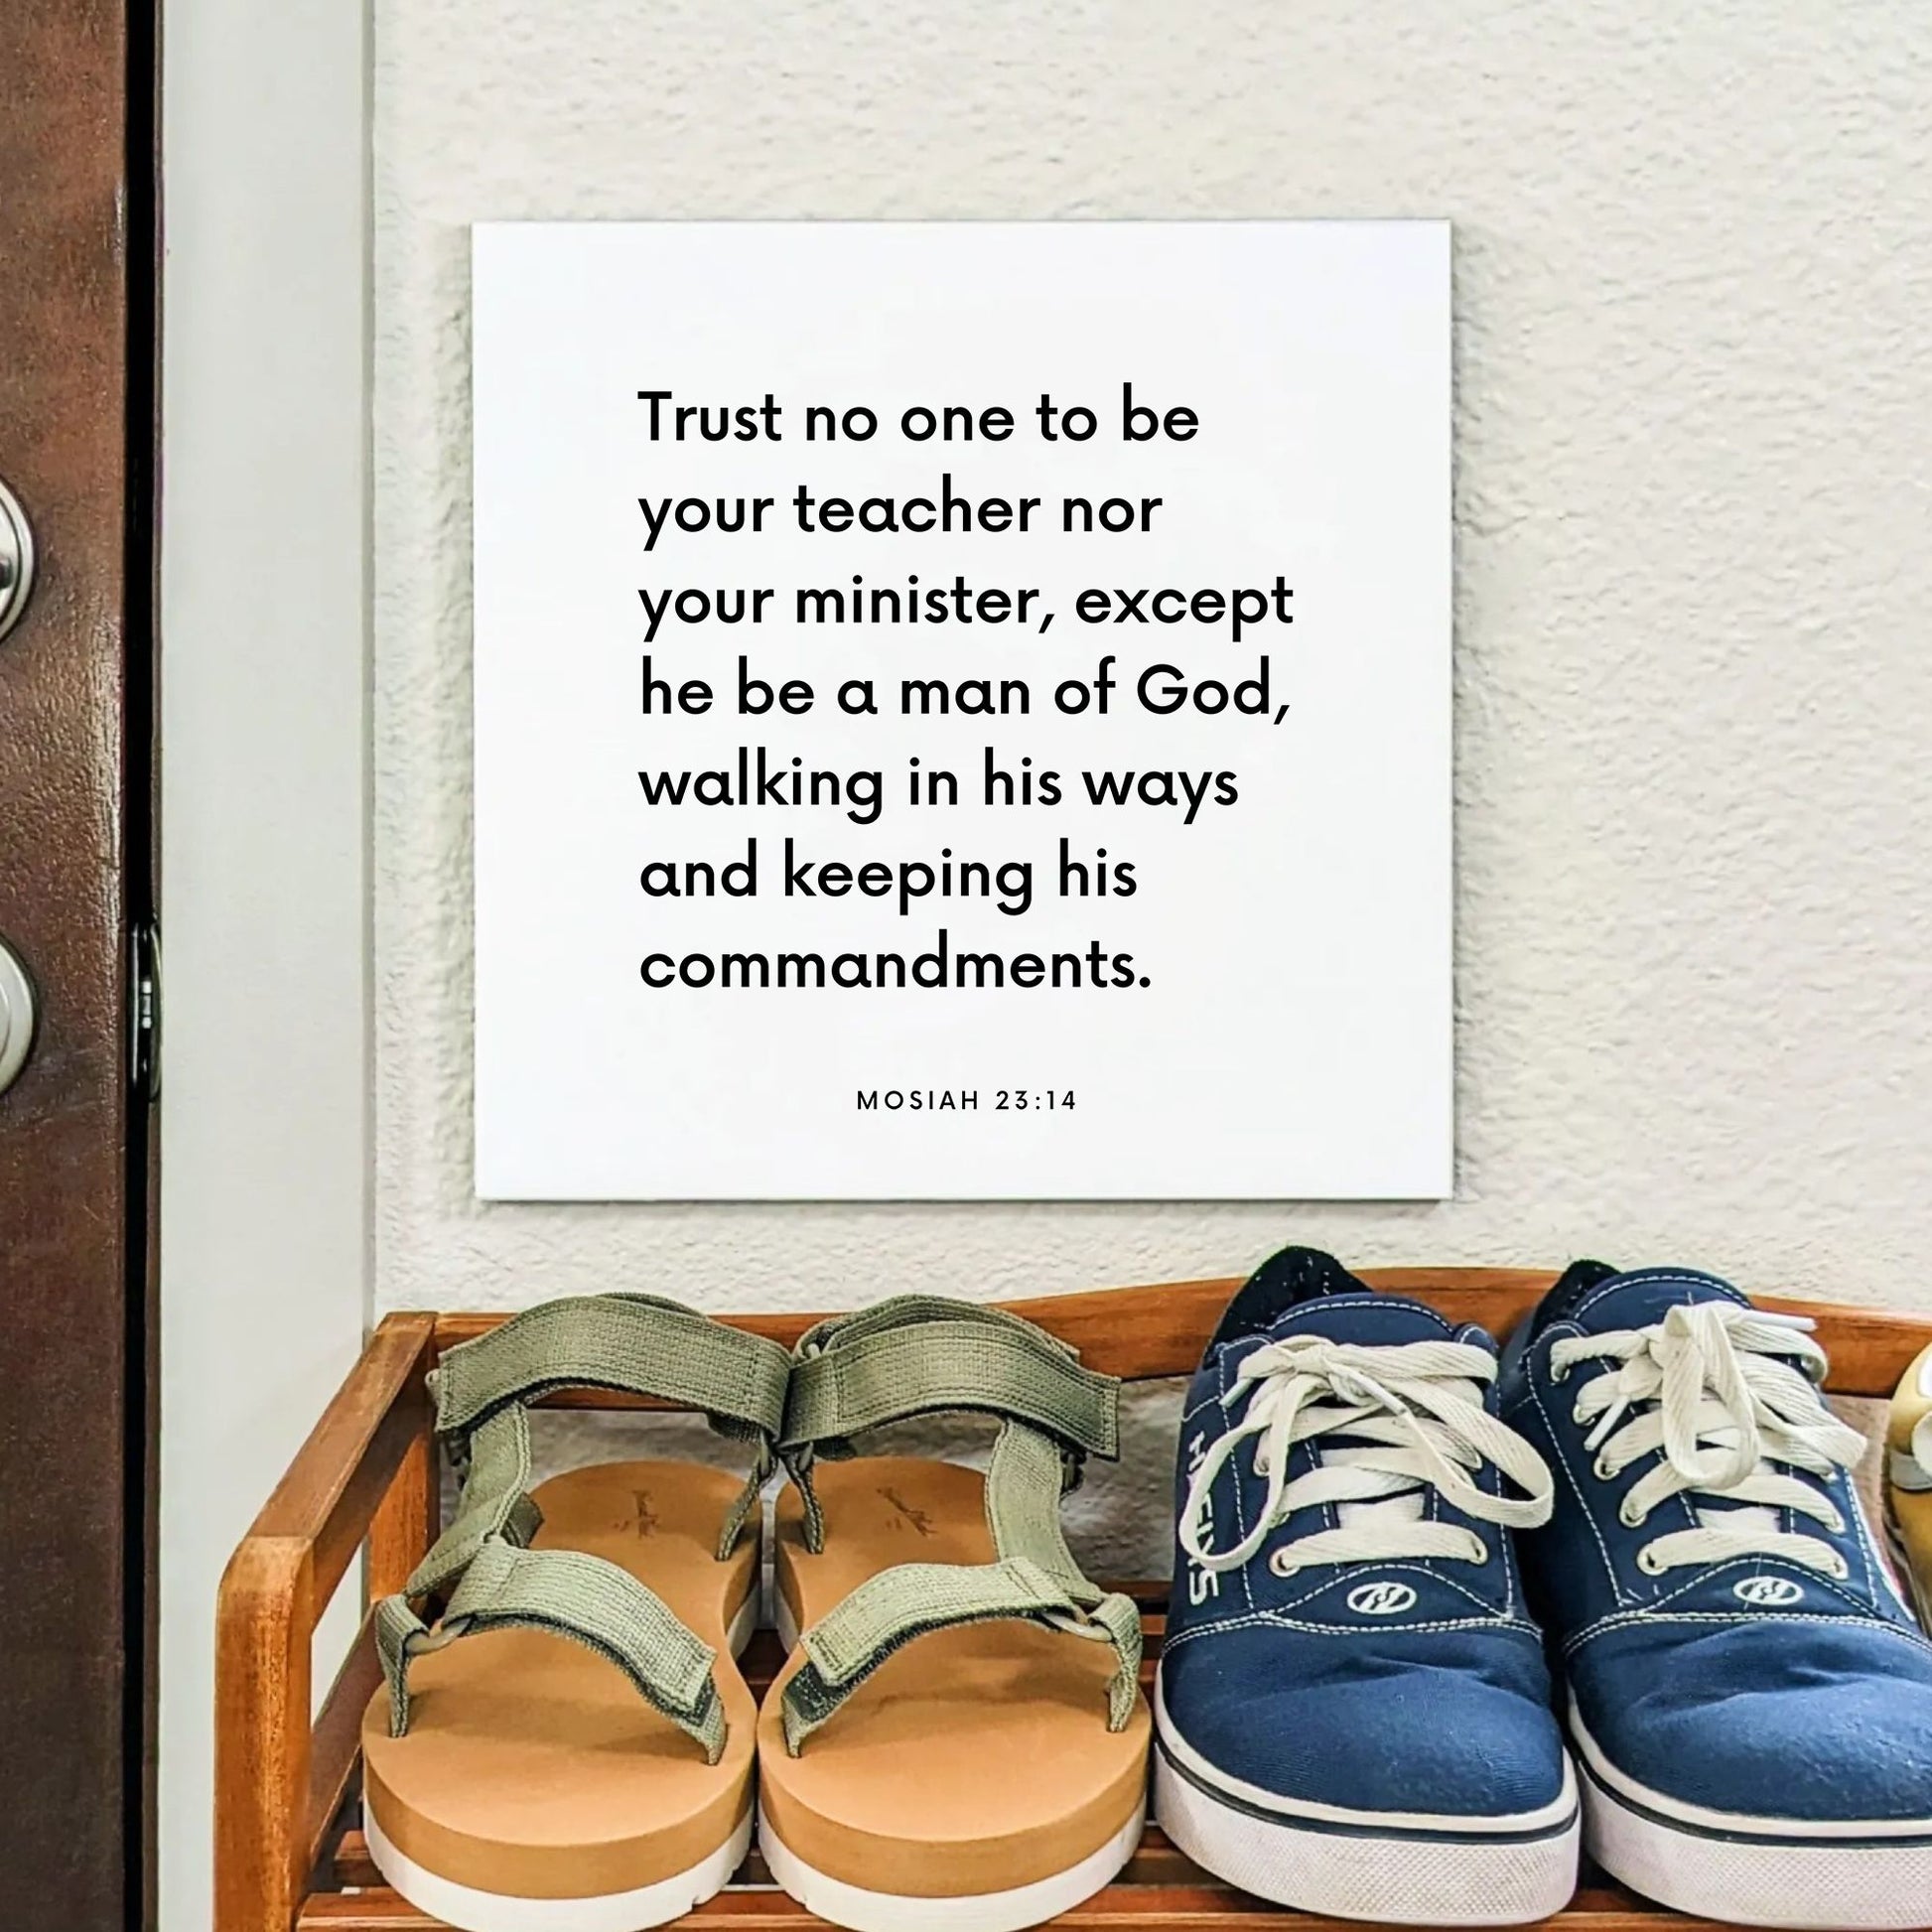 Shoes mouting of the scripture tile for Mosiah 23:14 - "Trust no one to be your teacher, except he be a man of God"